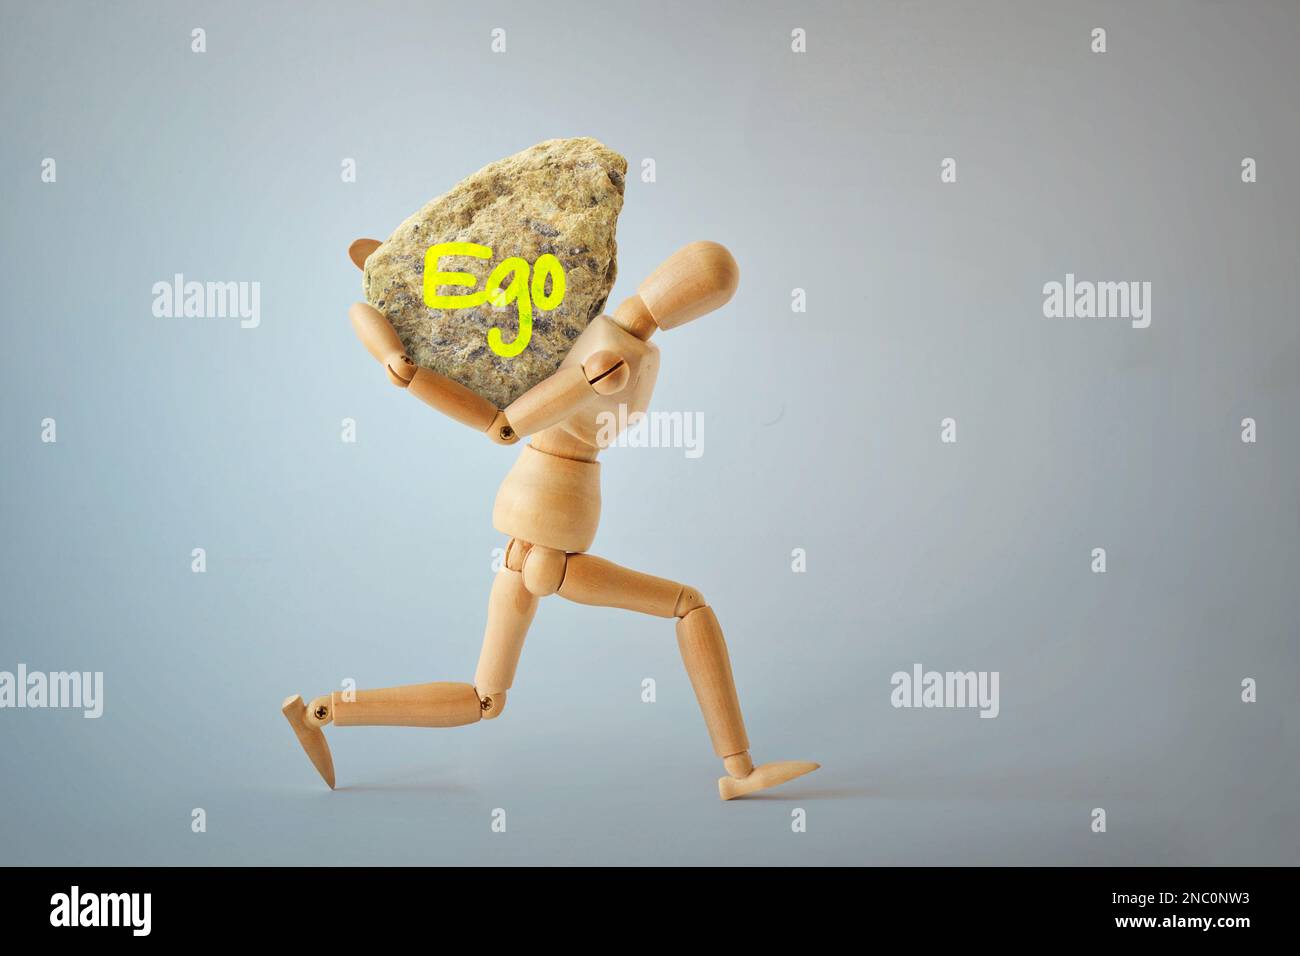 Wooden mannequin carrying heavy rock on his back - Concept of ego and emotional burden Stock Photo